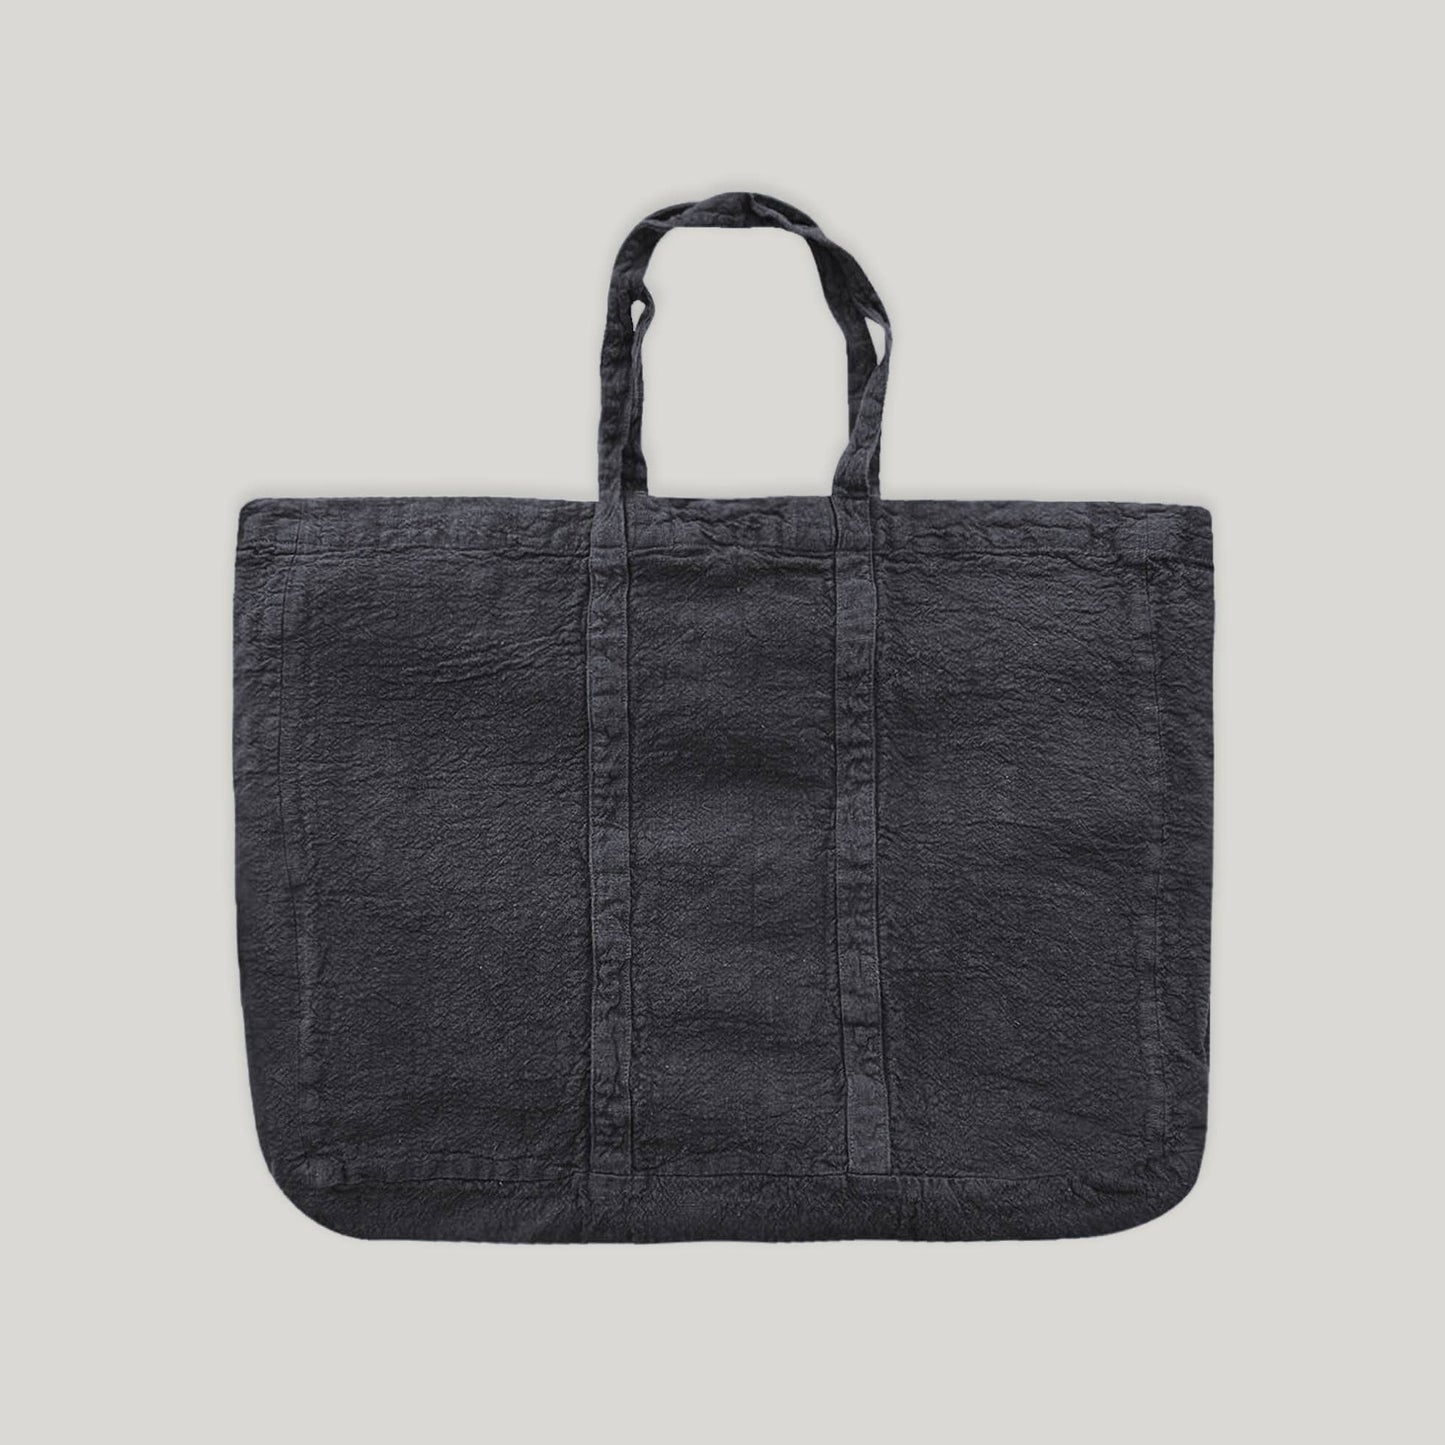 French Raw Linen Tote